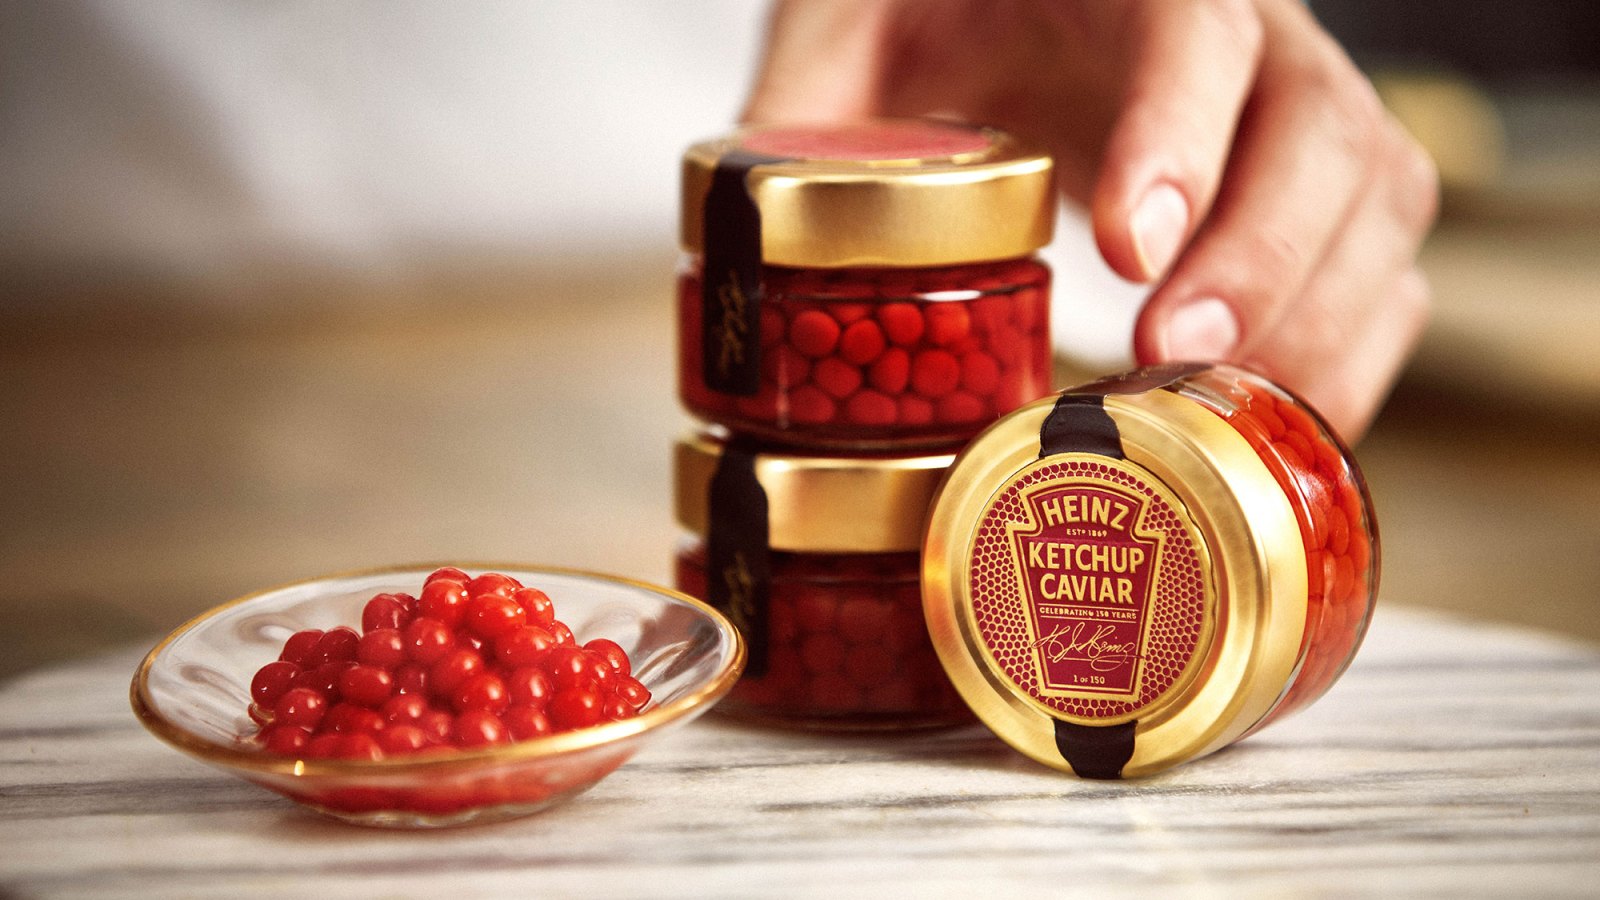 Heinz’s Caviar Ketchup Will Turn Your Valentine’s Day Meal Into a ‘Fine Dining Experience’